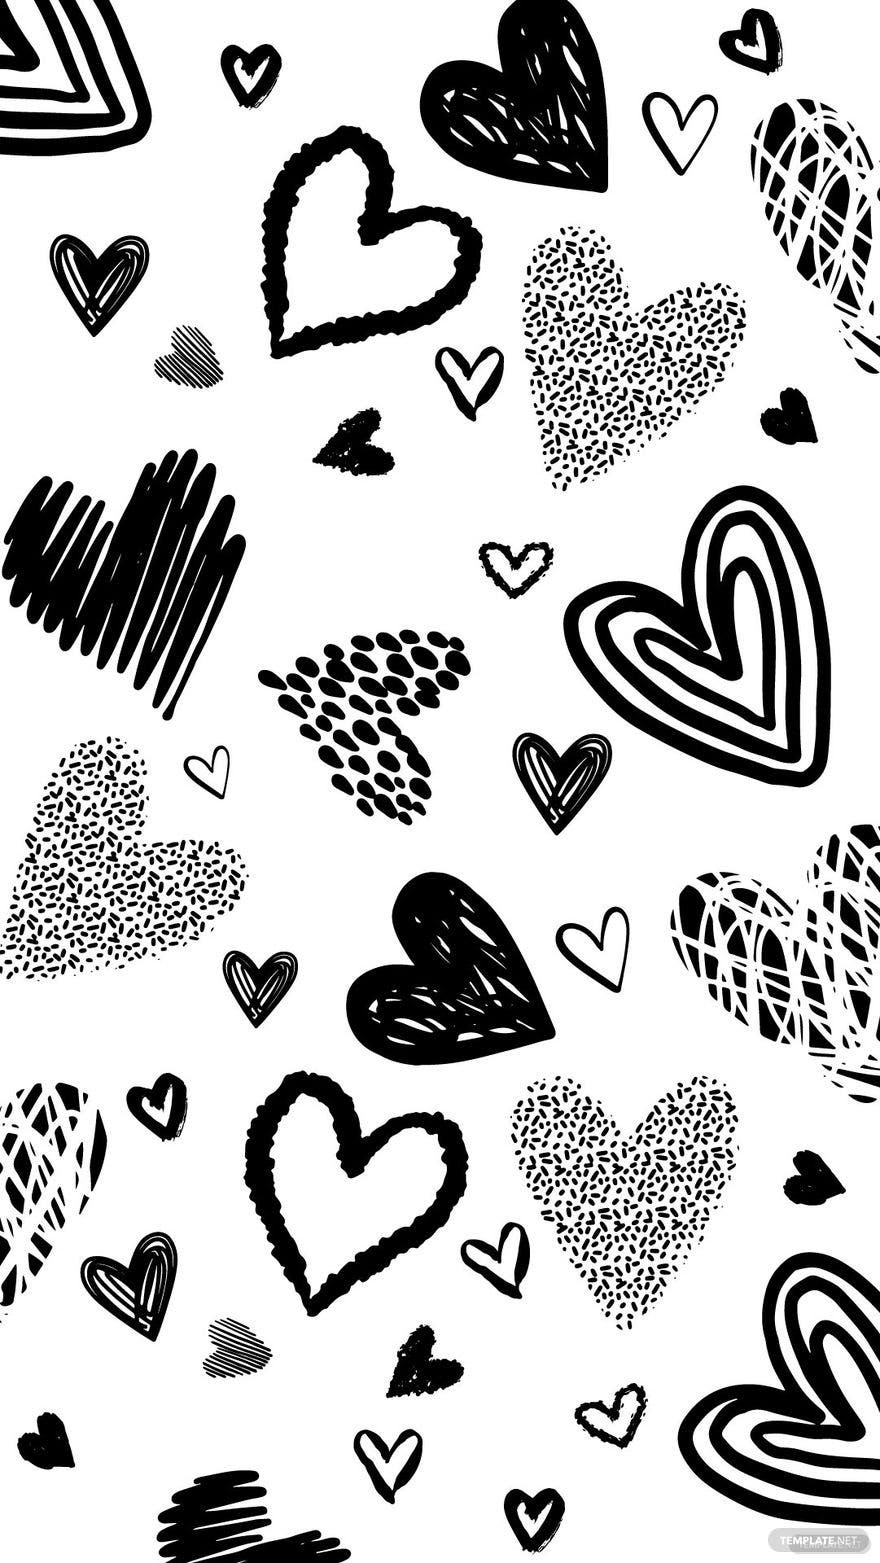 A black and white heart pattern with various shapes - Black heart